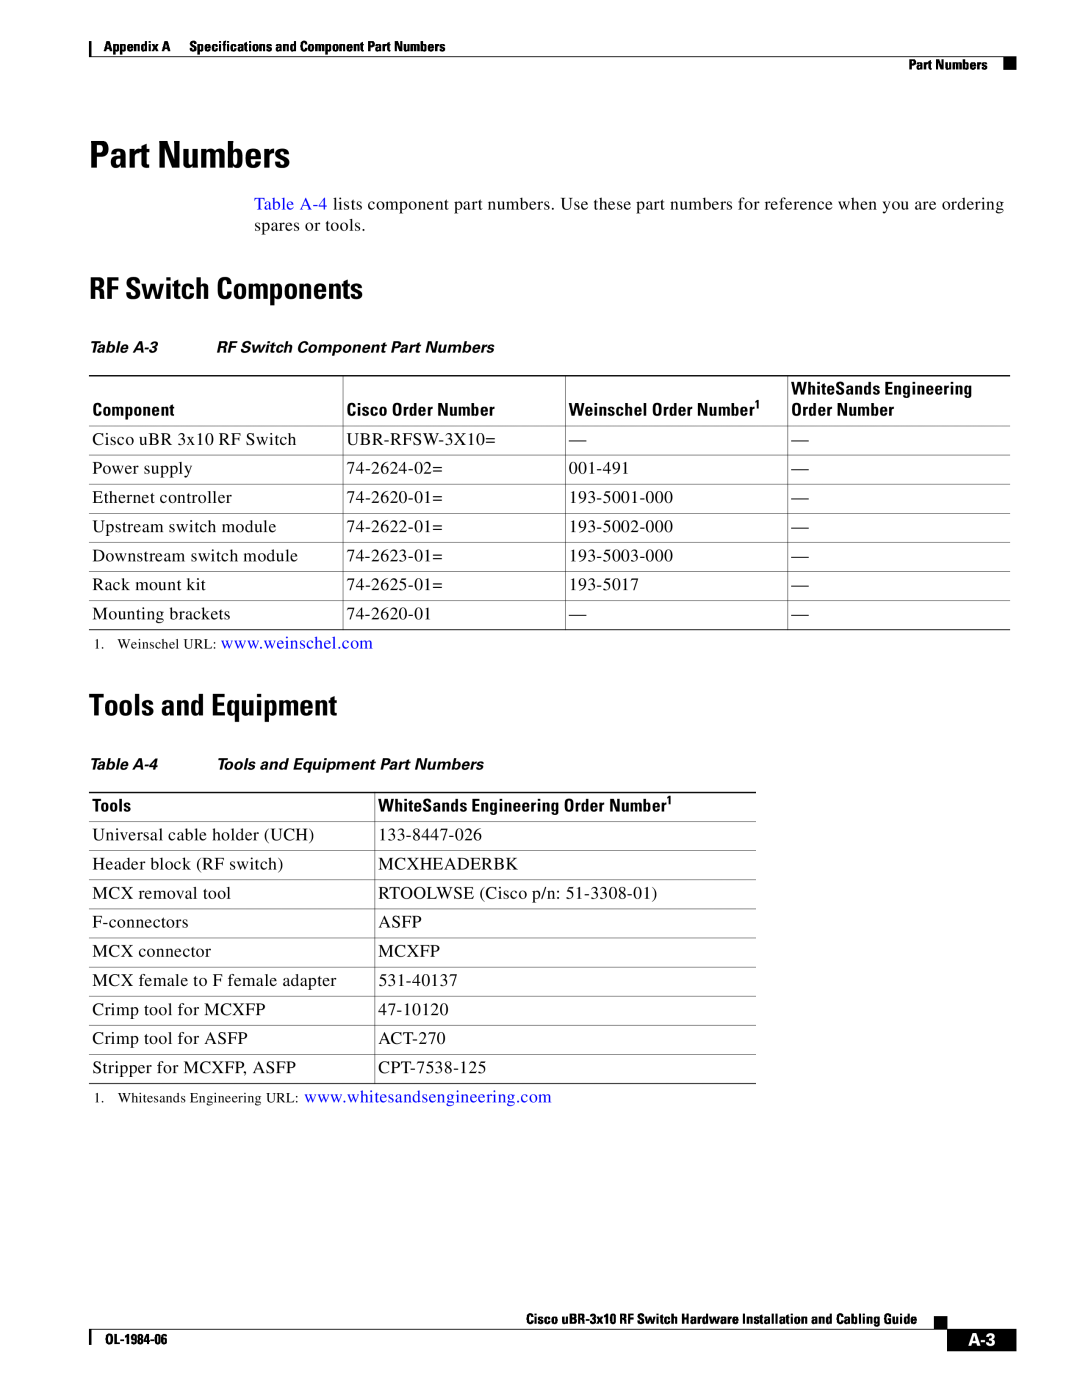 Cisco Systems UBR-3X10 manual Part Numbers, RF Switch Components, Tools and Equipment 